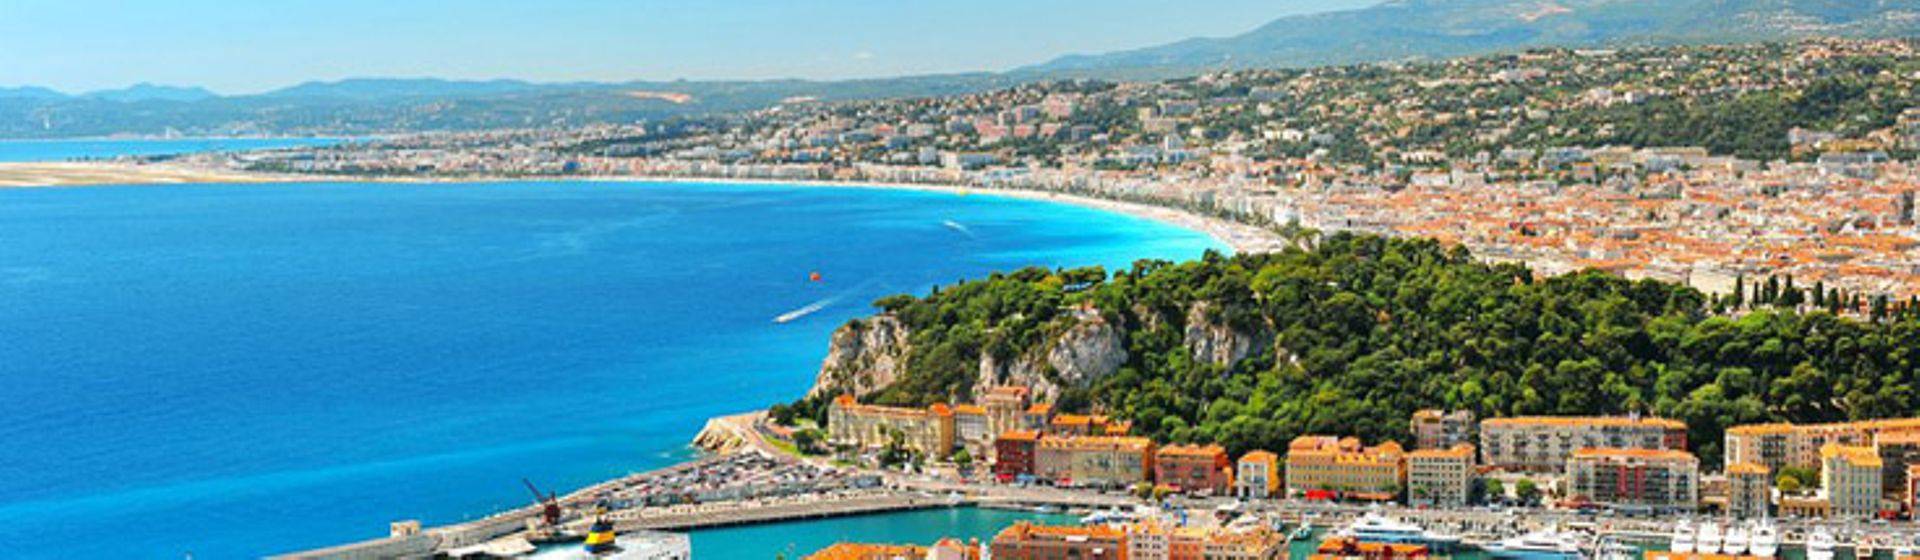 Holidays to French Riviera Image